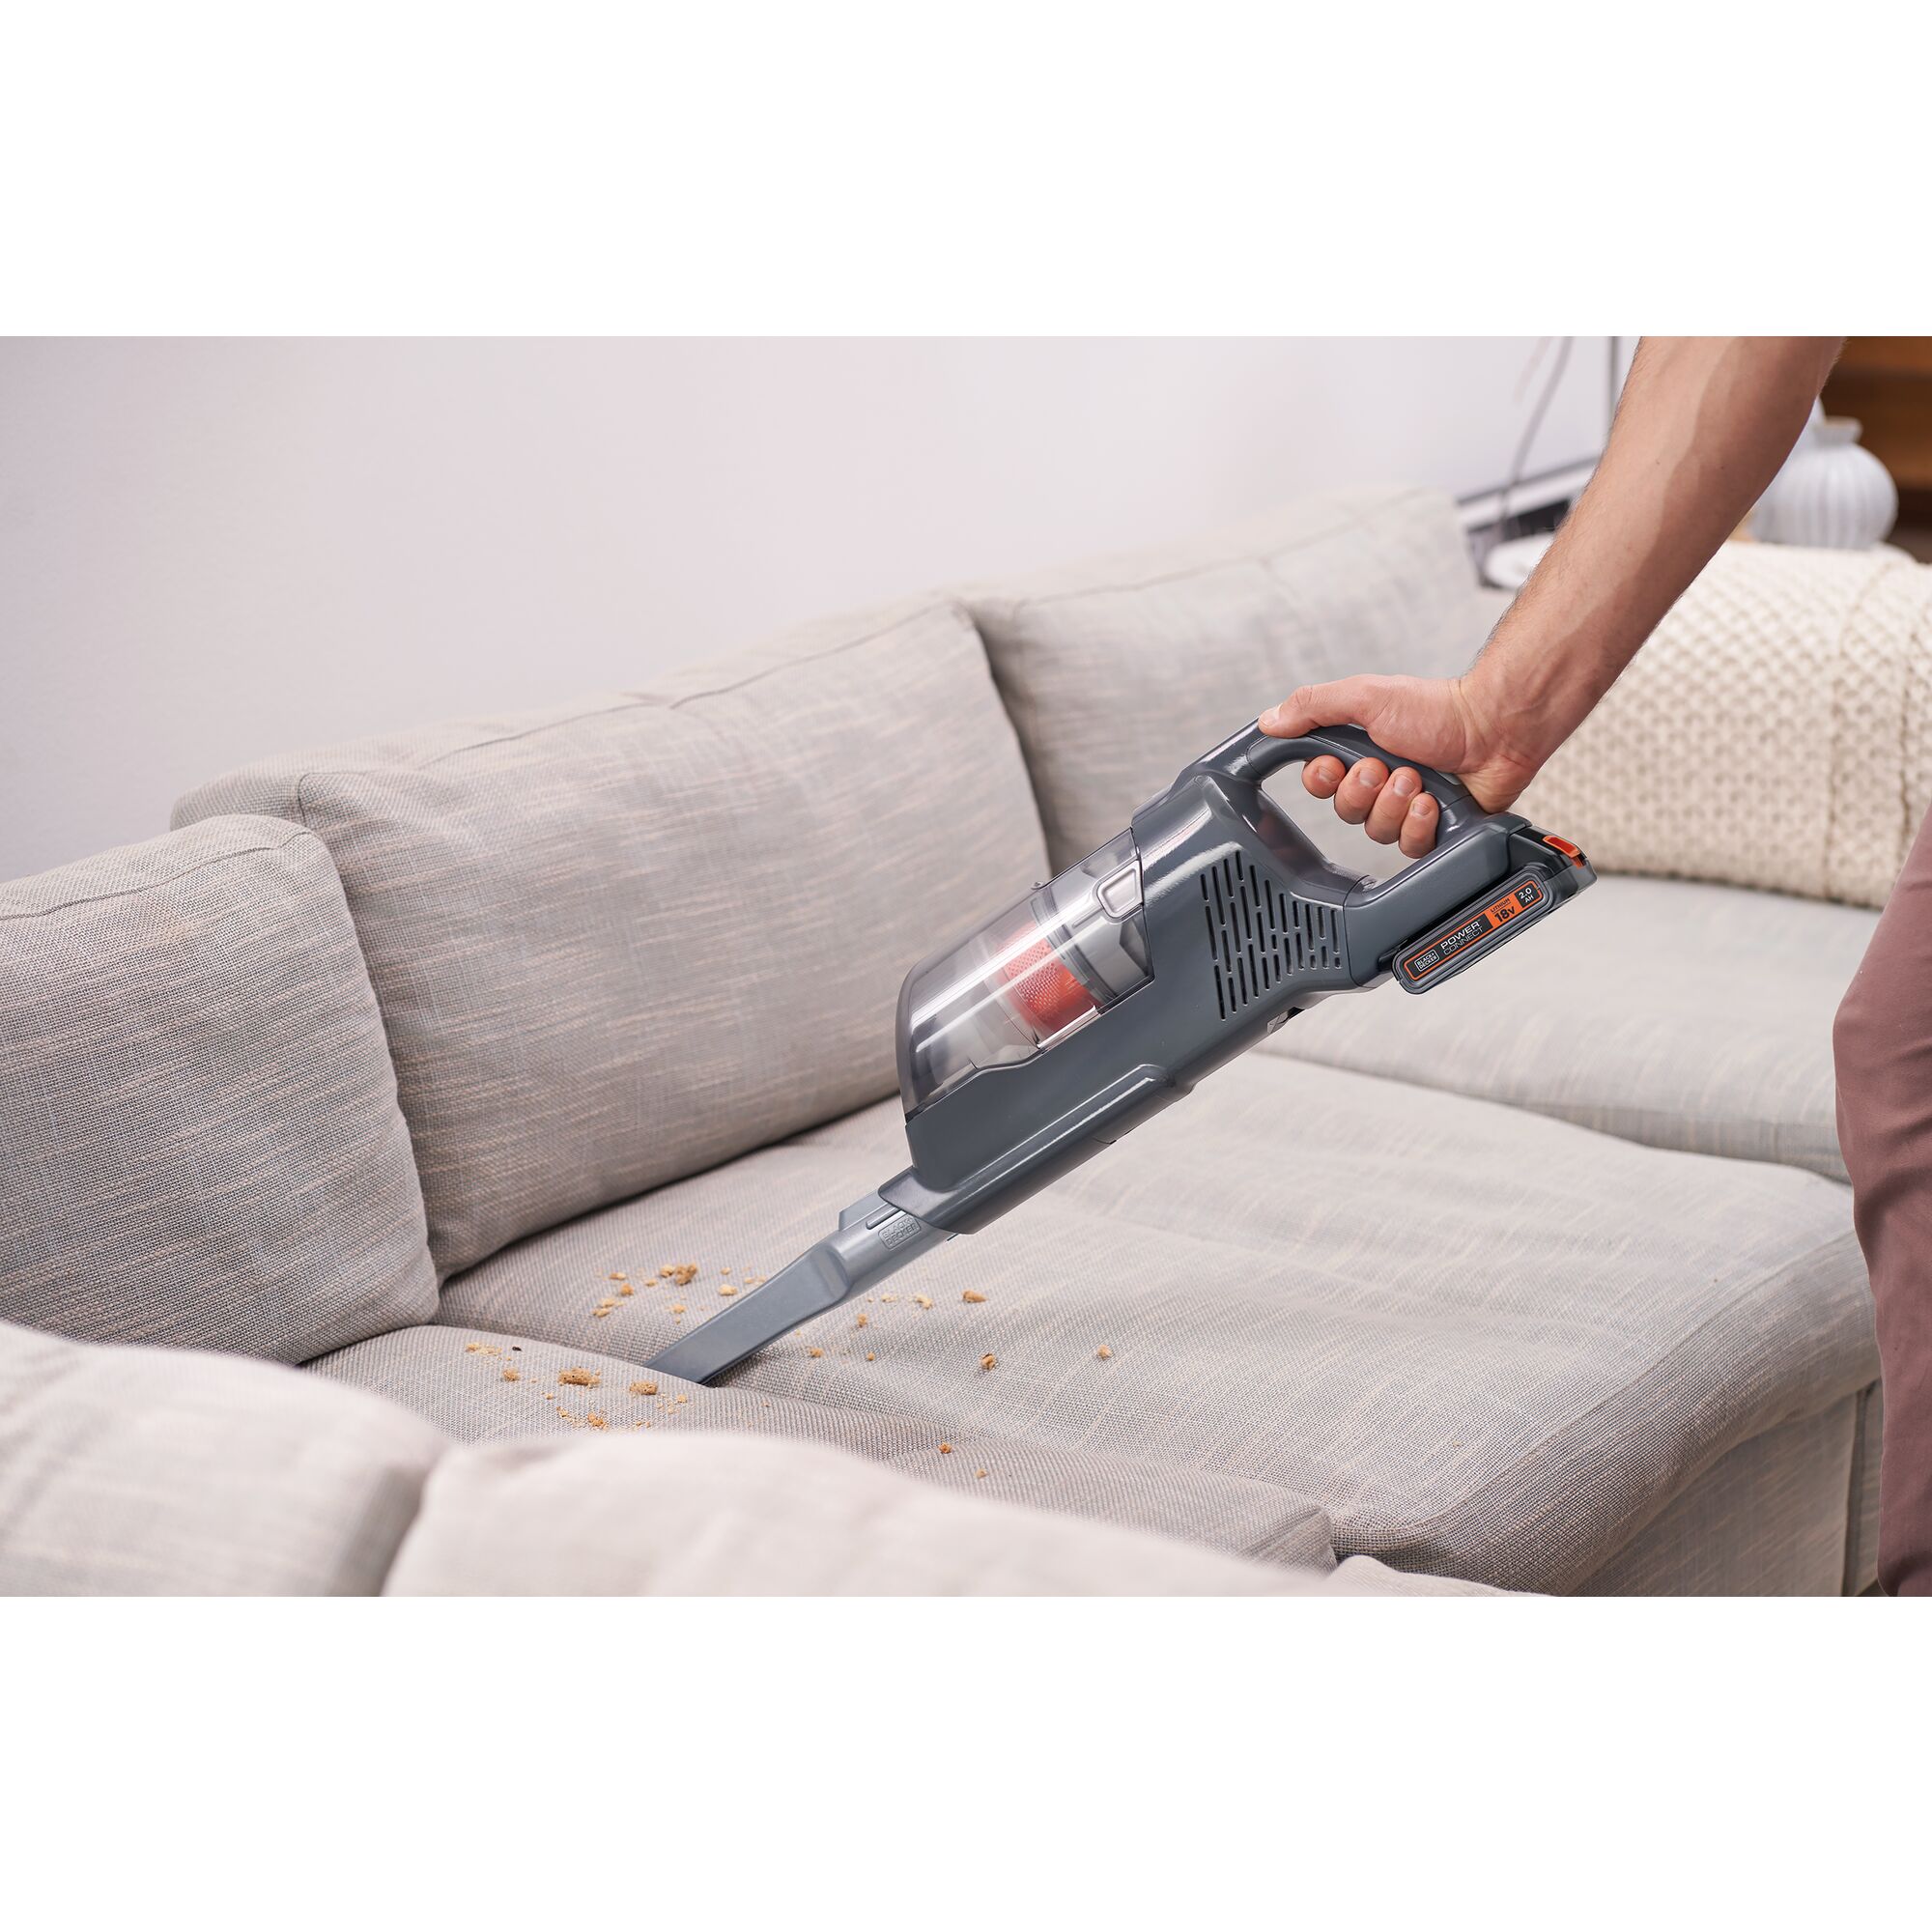 POWER SERIES plus Cordless Stick Vacuum being used for cleaning mess on sofa.